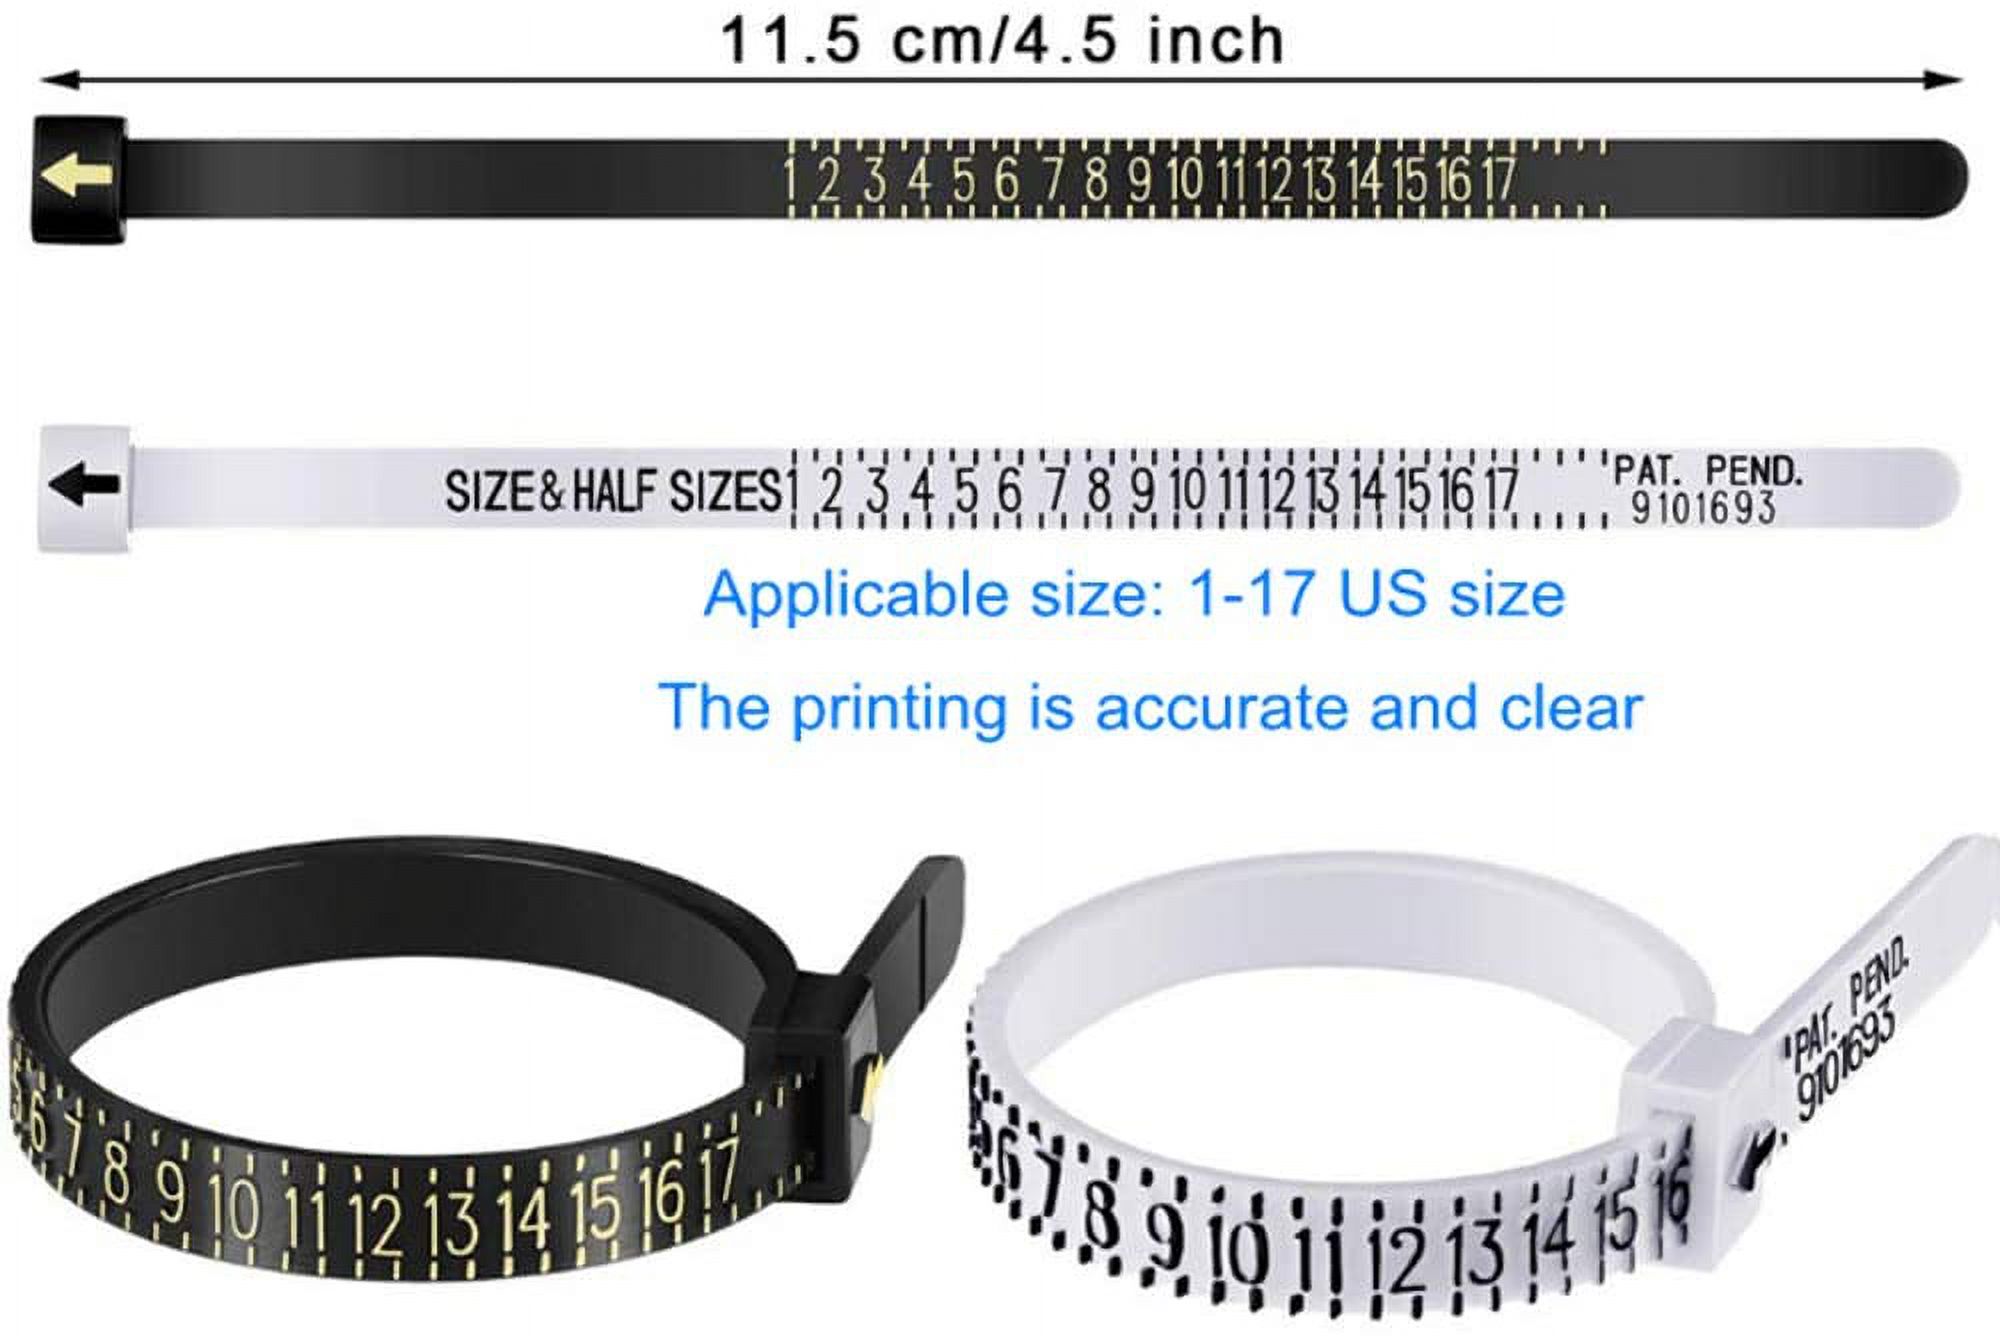 6PCS Upgrade Ring Sizer Measuring Tool, Accurate Ring Sizers for